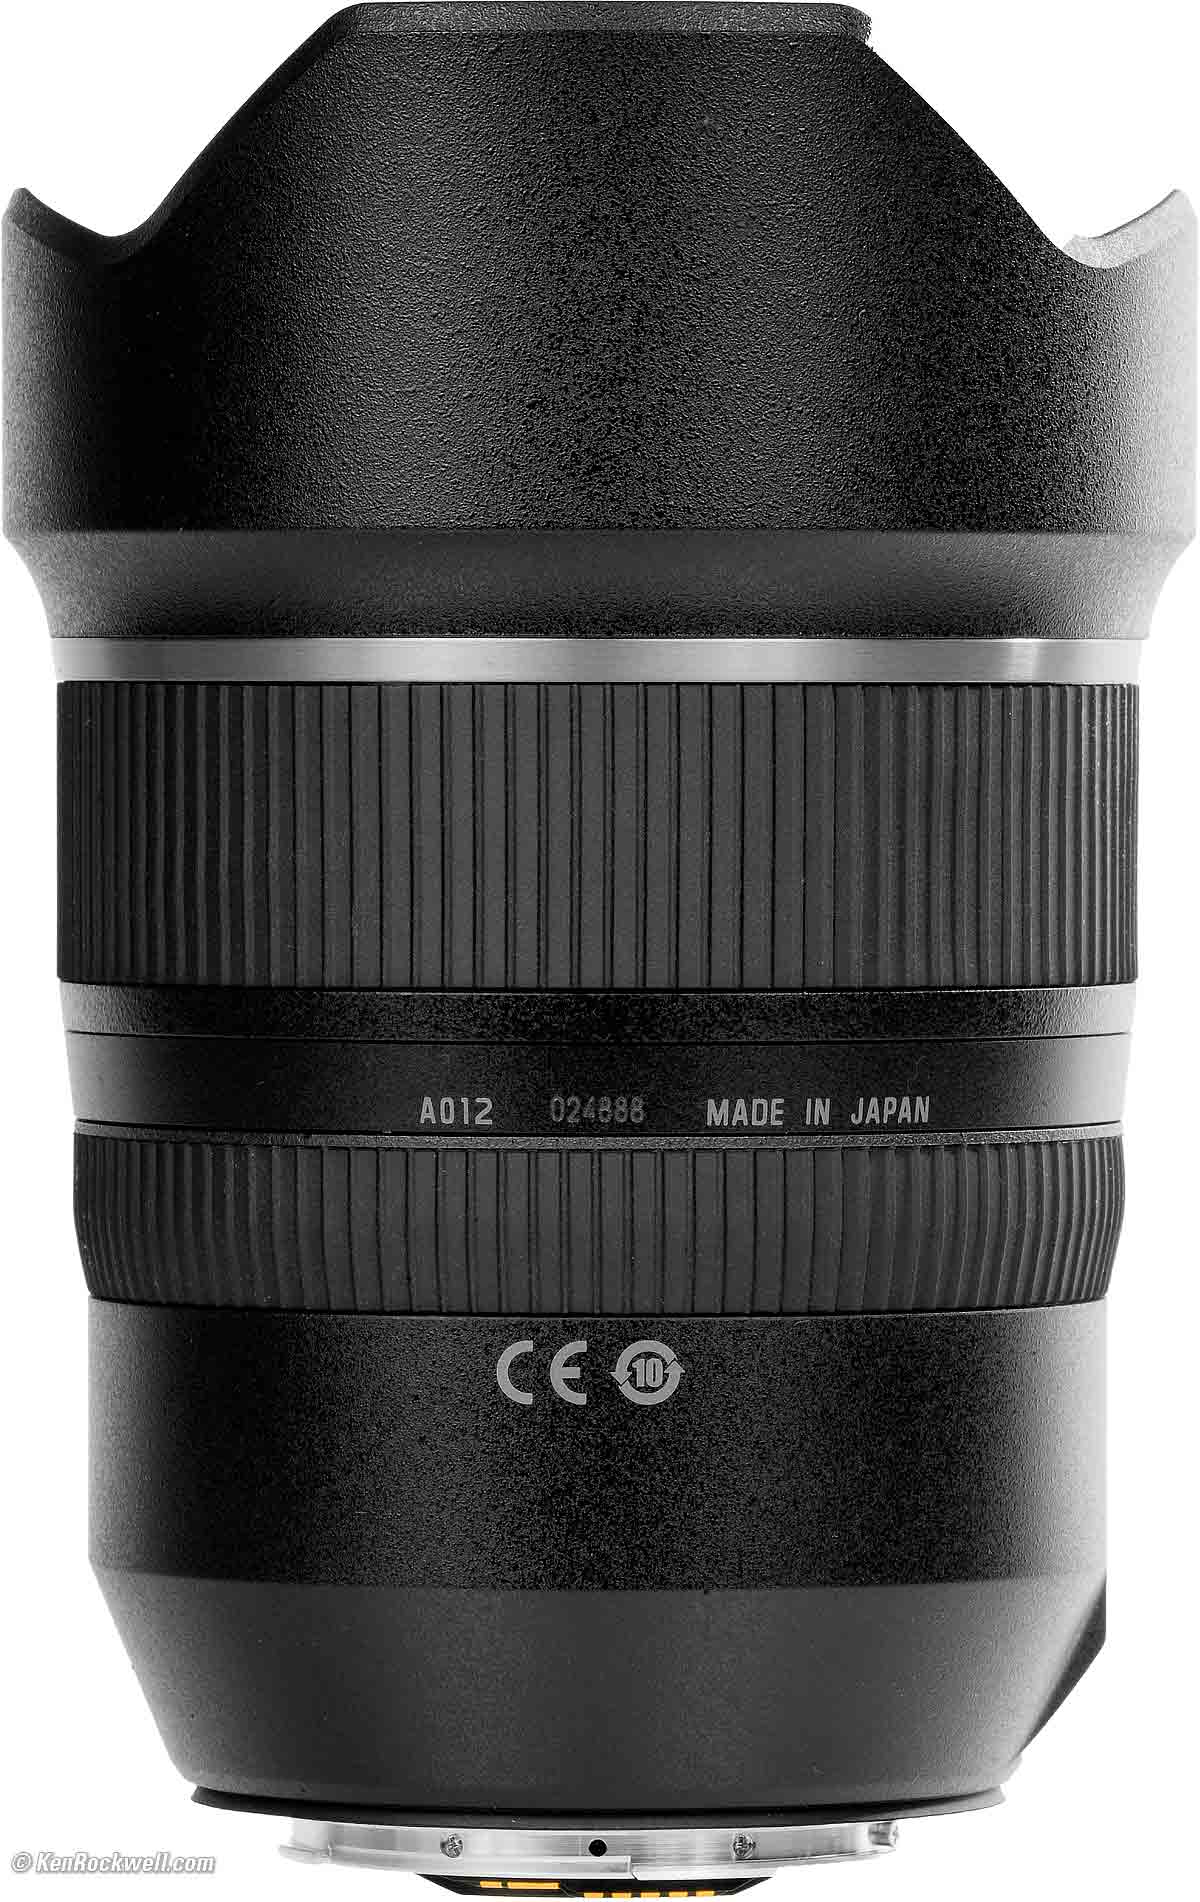 Tamron 15-30mm Review